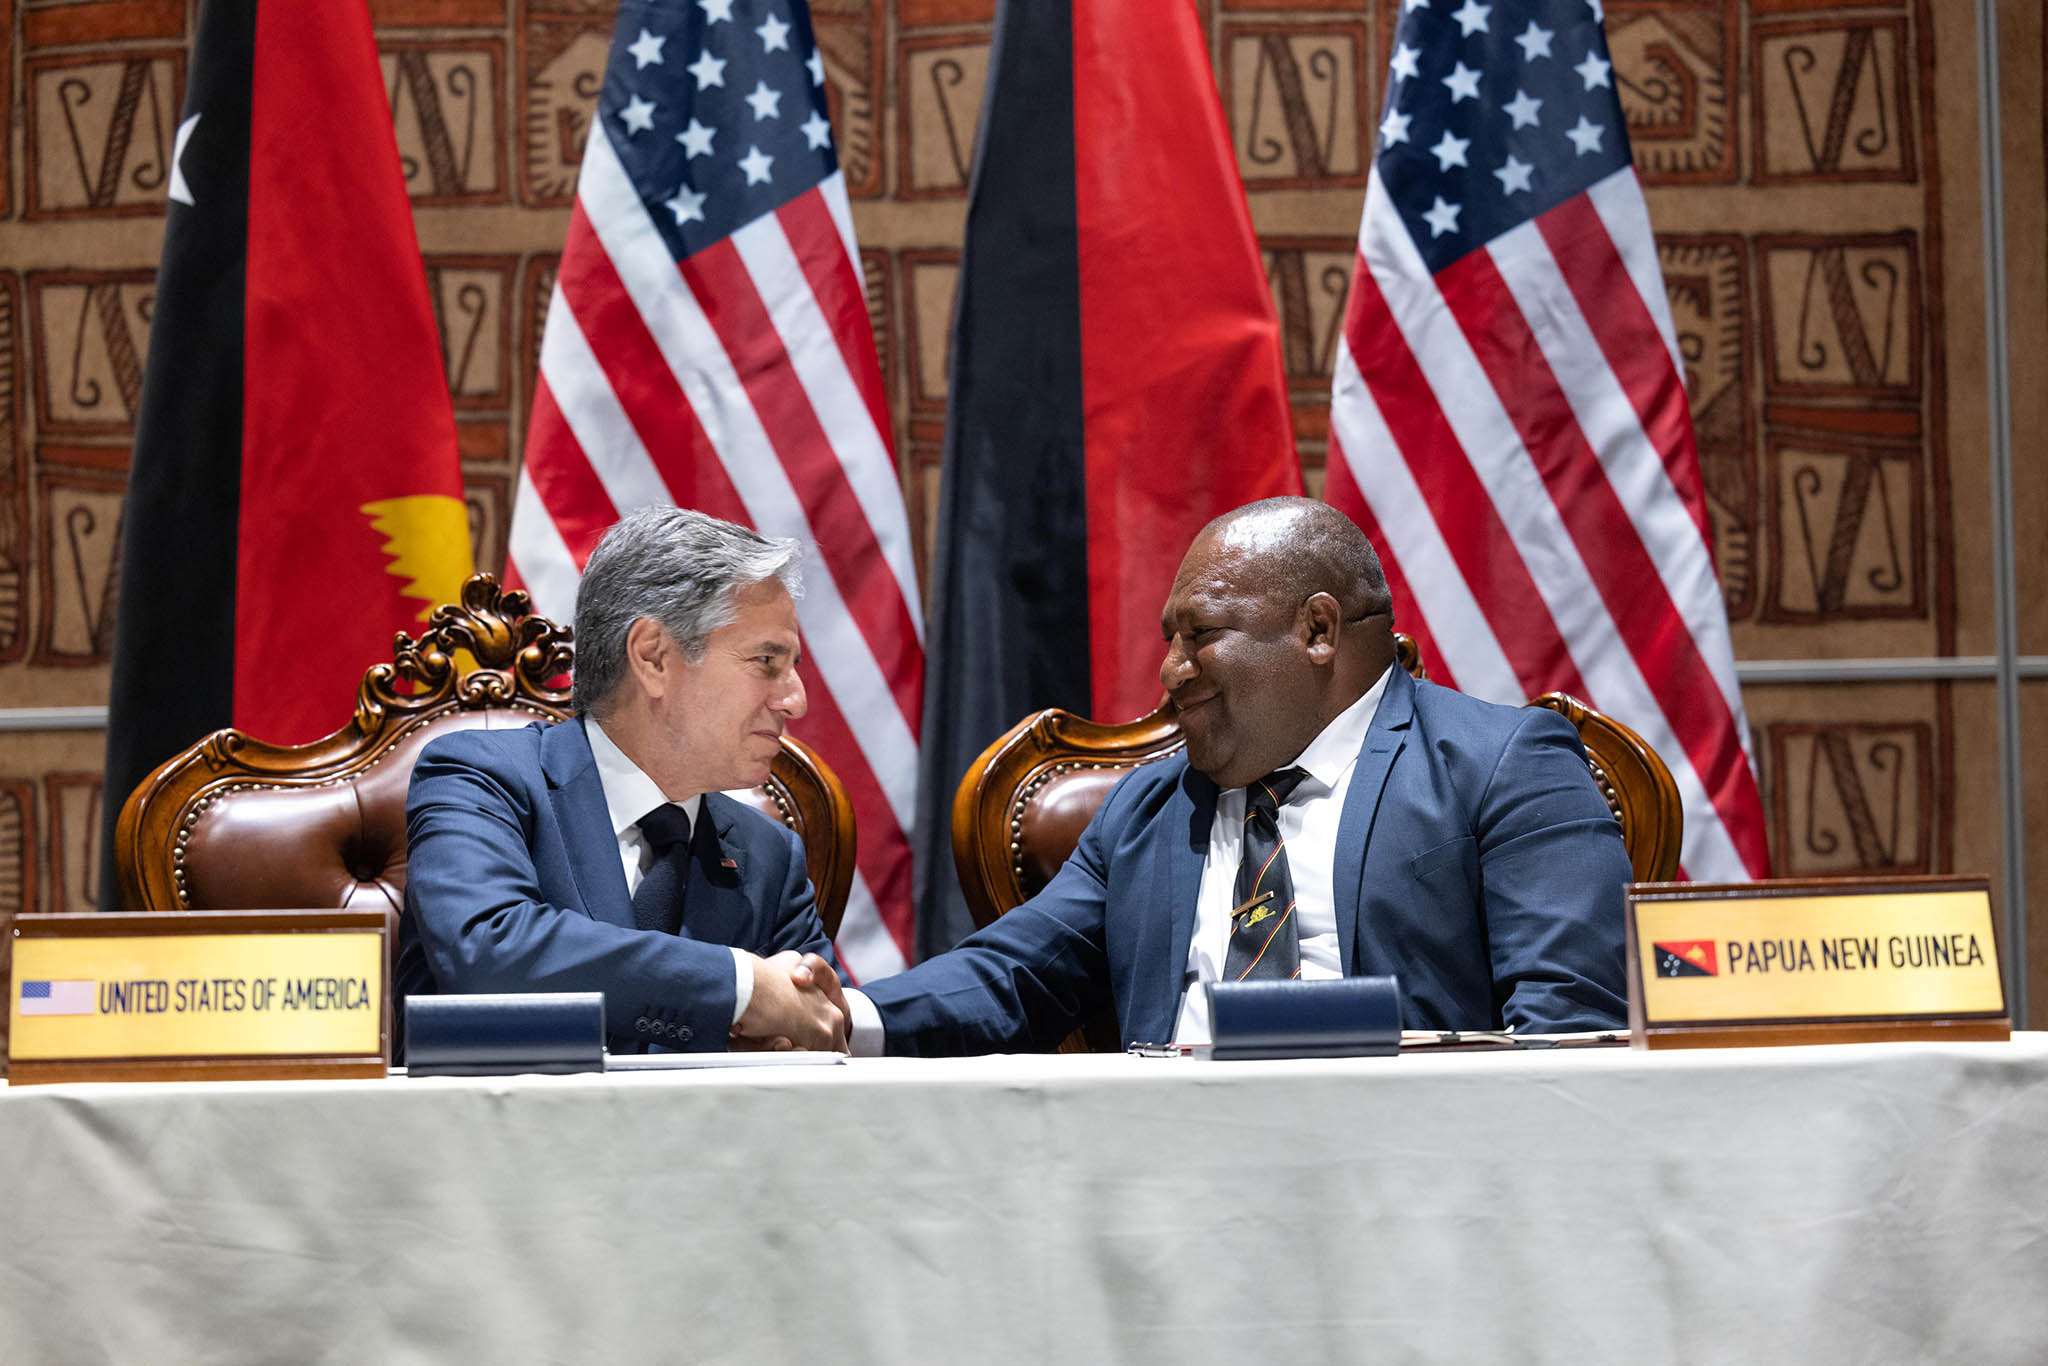 Secretary Blinken signs a Defense Cooperation Agreemant with PNG Defense Minister Win Daki and Prime Minister James Marape, Papua New Guinea, May 22, 2023. (Chuck Kennedy/State Department)